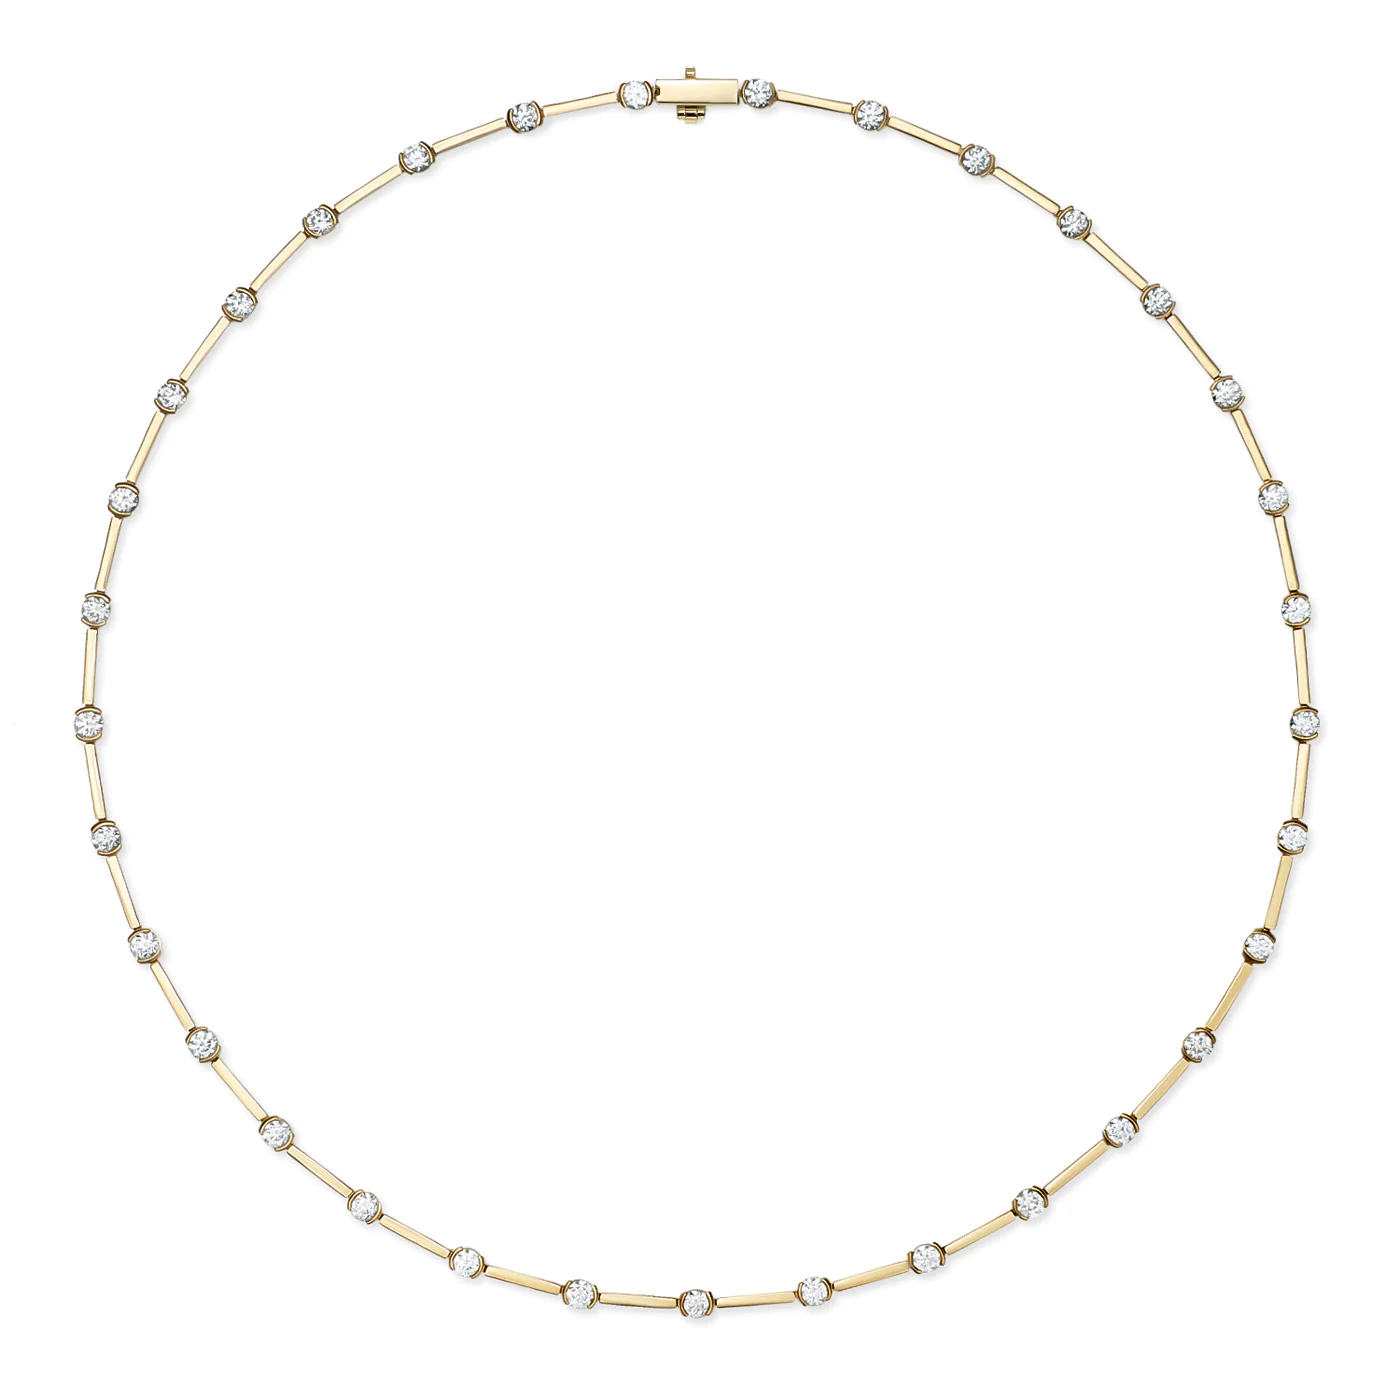 ZEA LINKED NECKLACE - Squash Blossom Vail